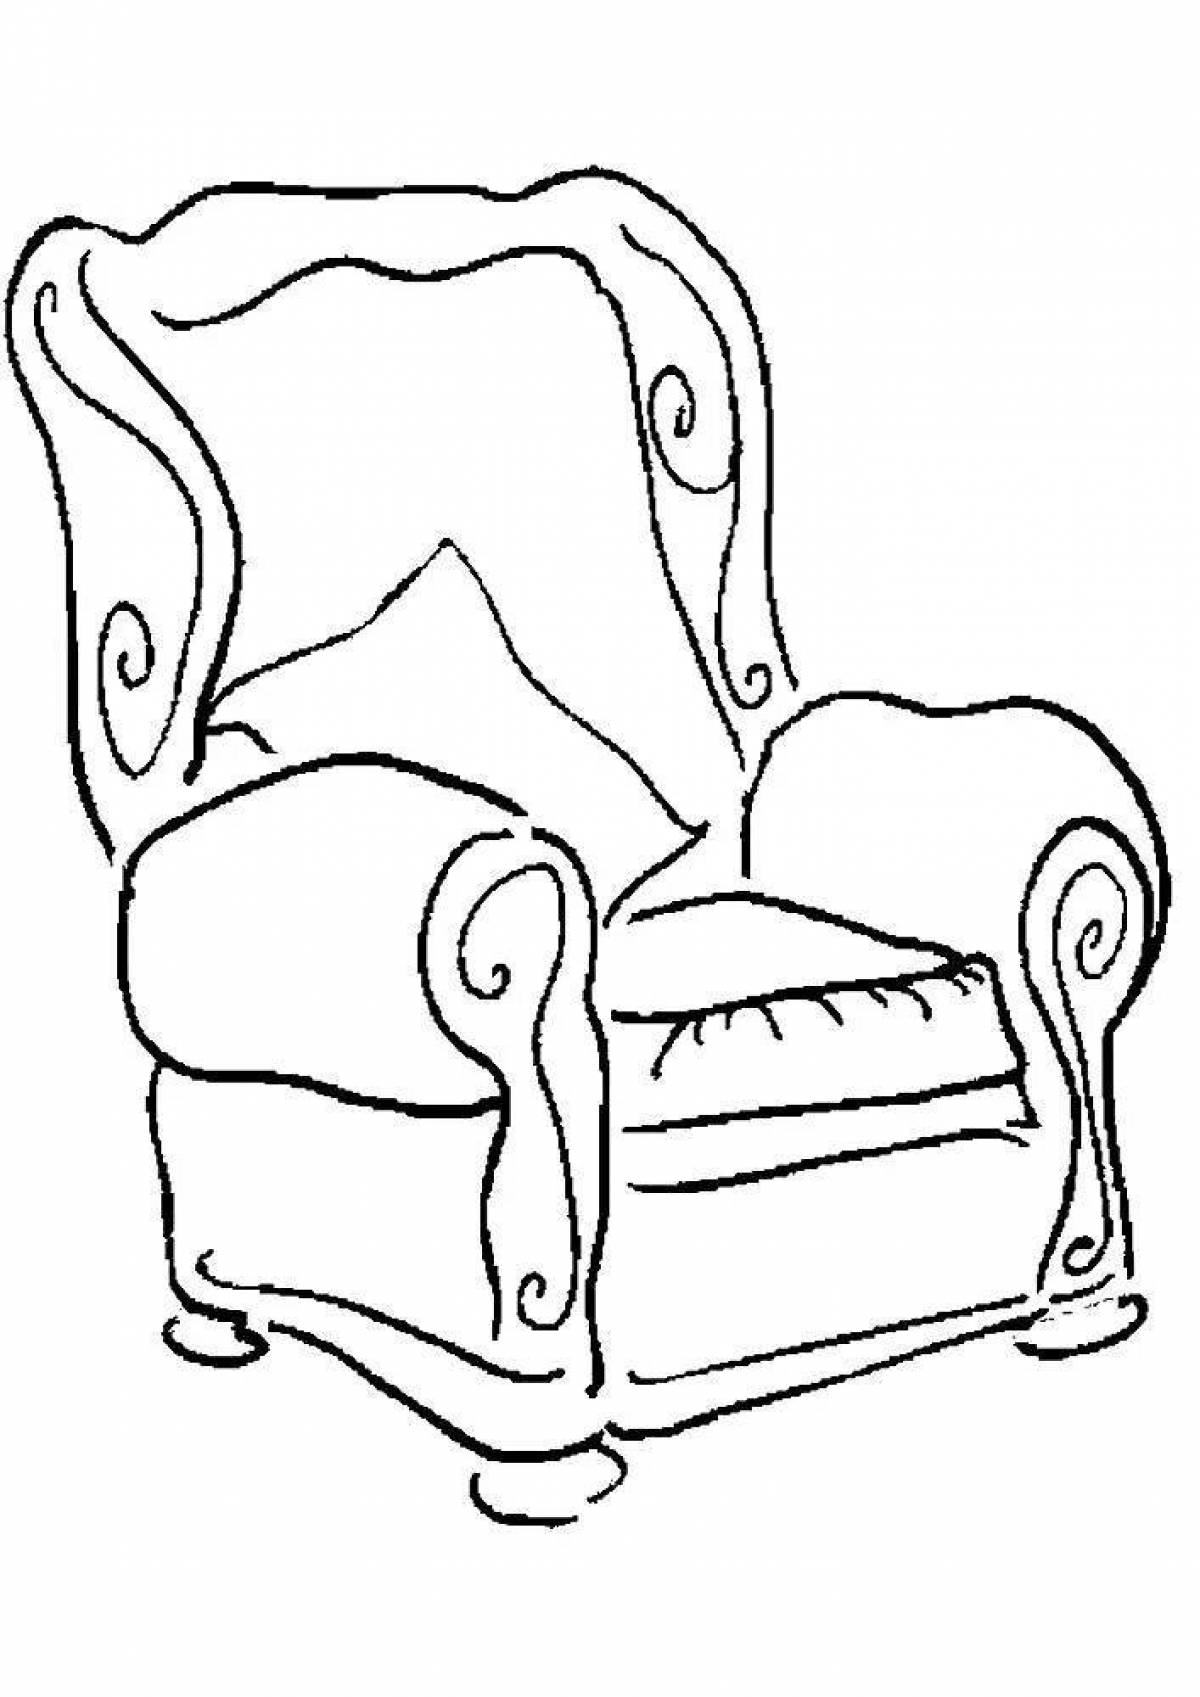 Fabulous chair coloring book for children 3-4 years old